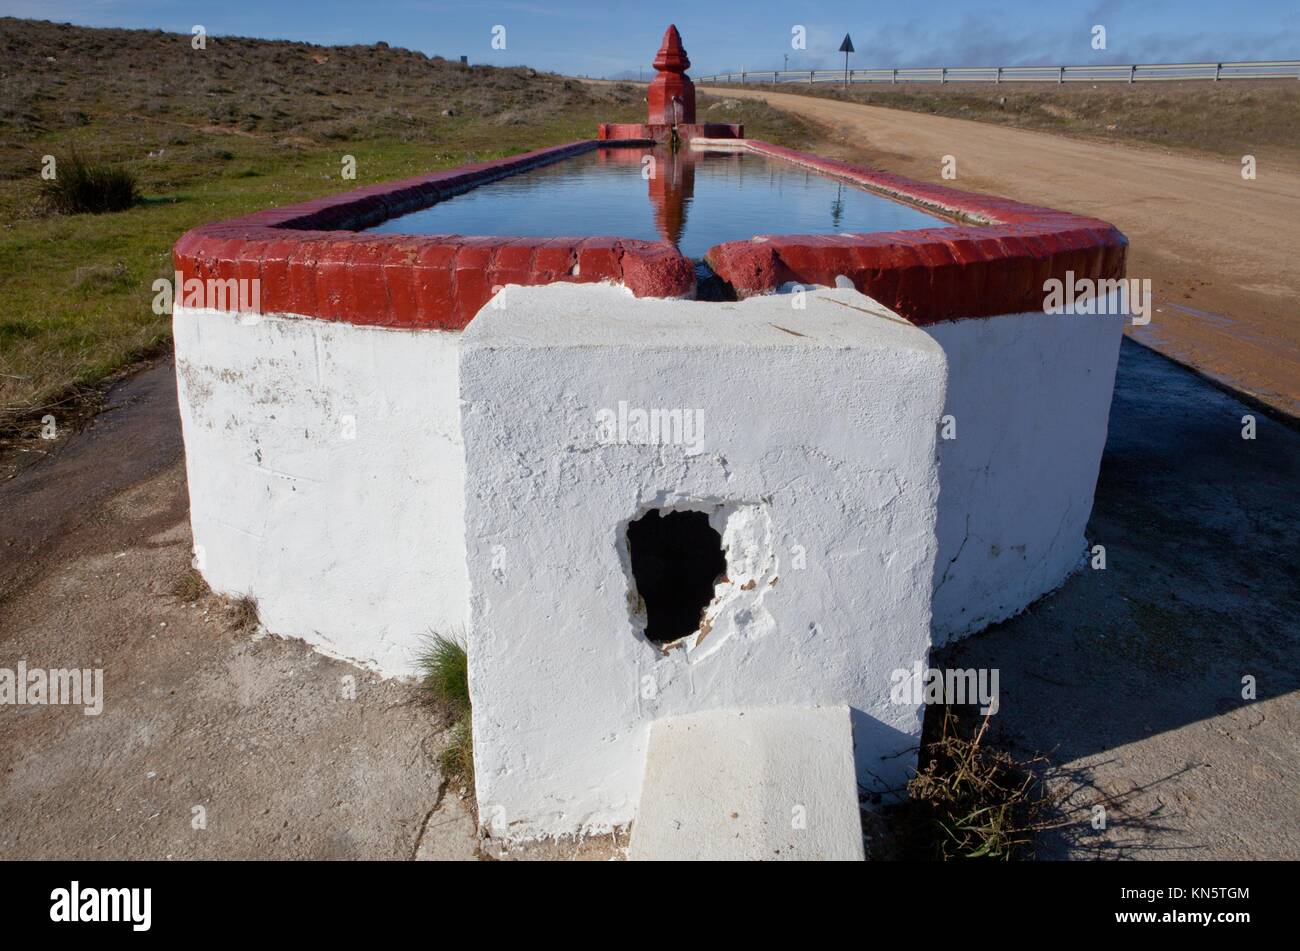 Rural fountain and basin with containers for agricultural livestock purposes, Spain. Stock Photo